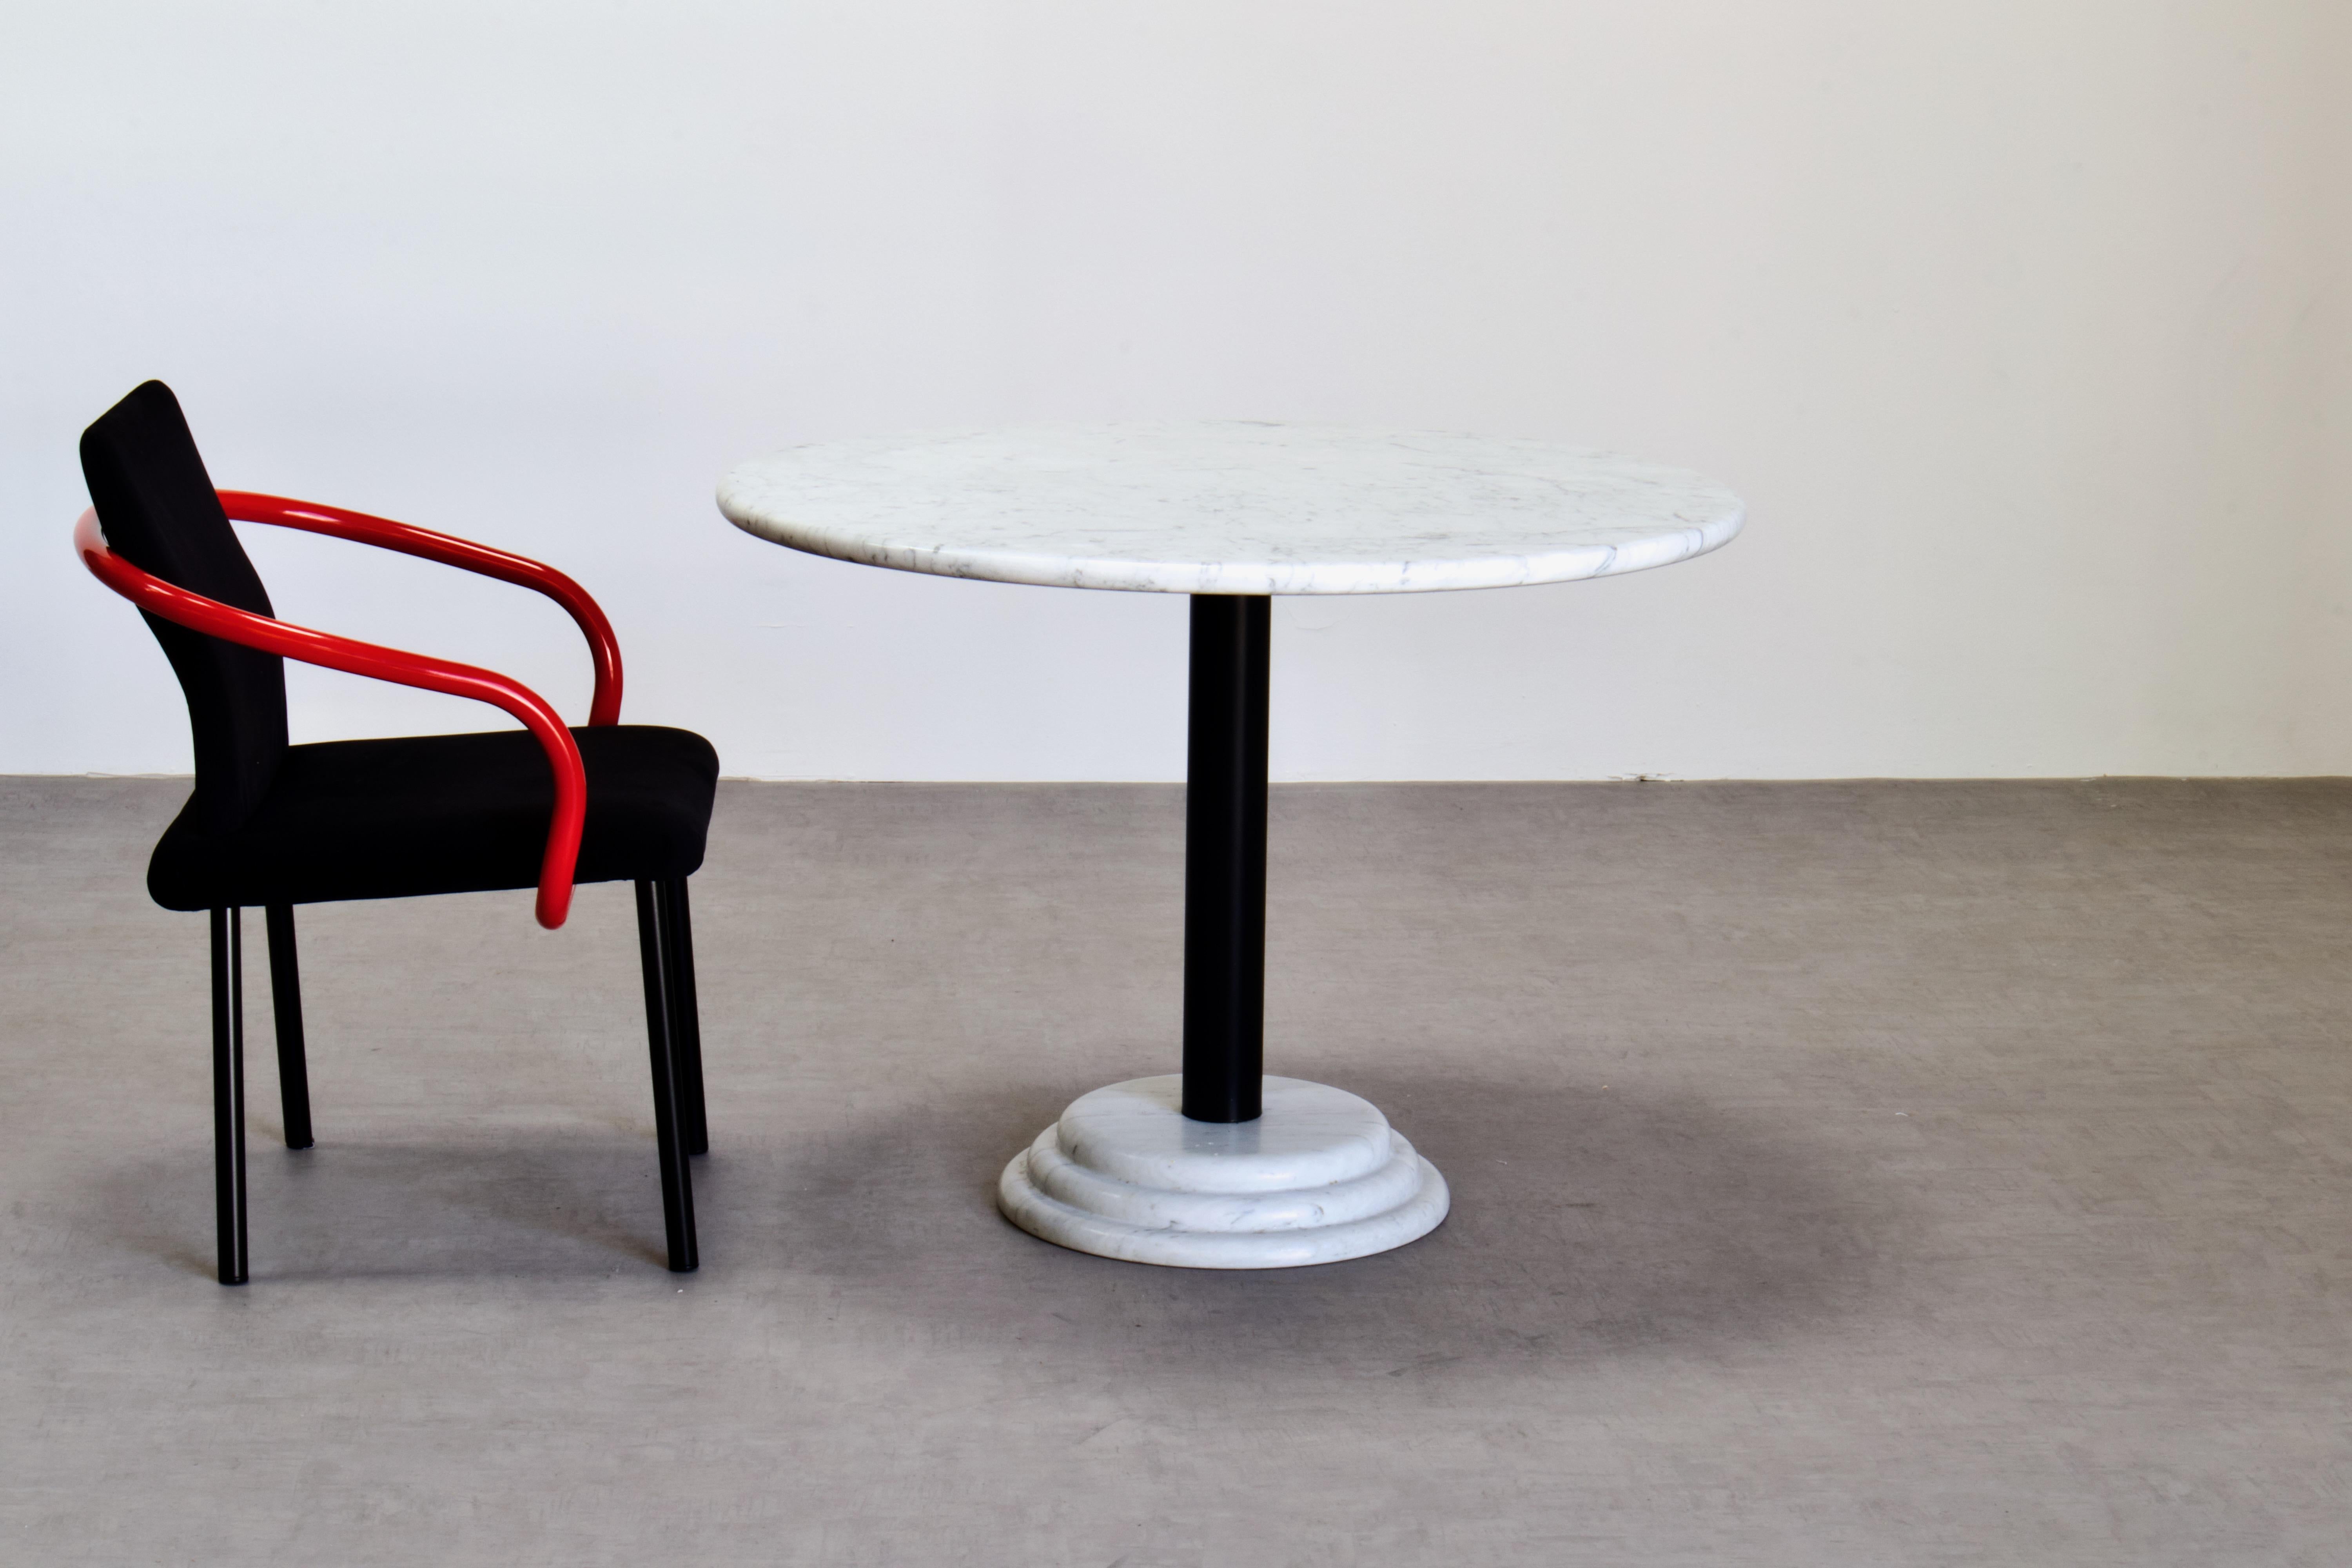 Late 20th Century Ettore Sottsass Mandarin Dining Set in Carrara Marble, Red & Black, 1986 Italy For Sale